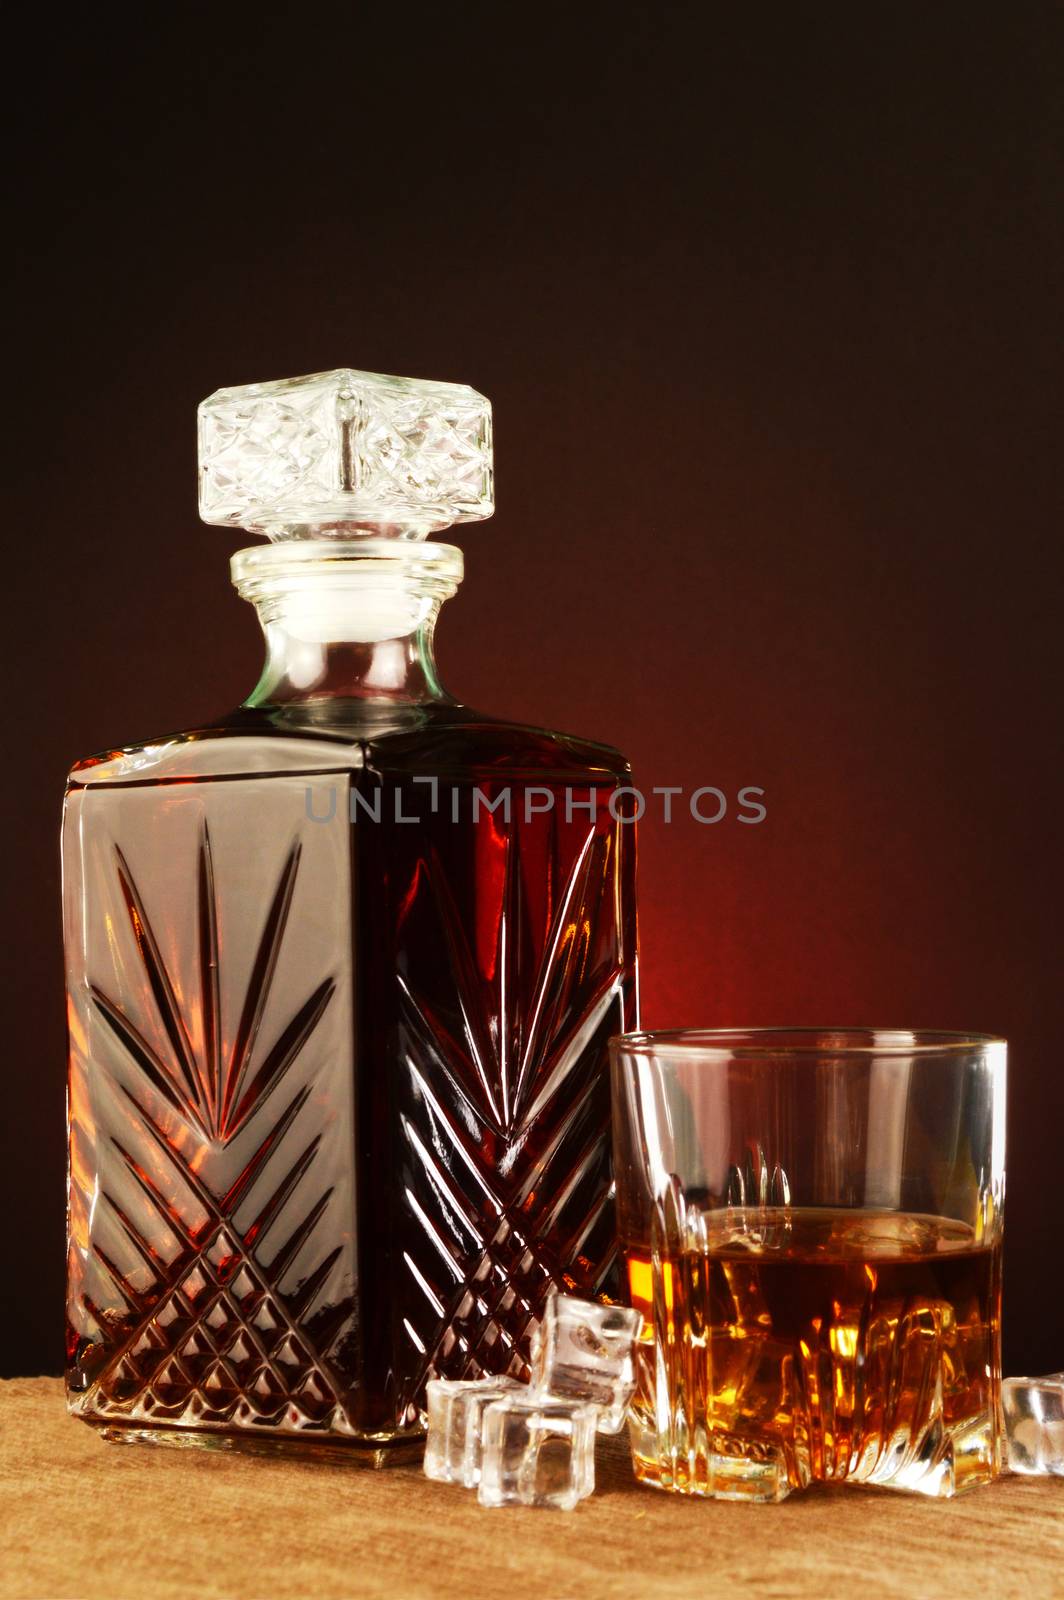 An elegant antique look and feel to this focused theme of whisky on the rocks.